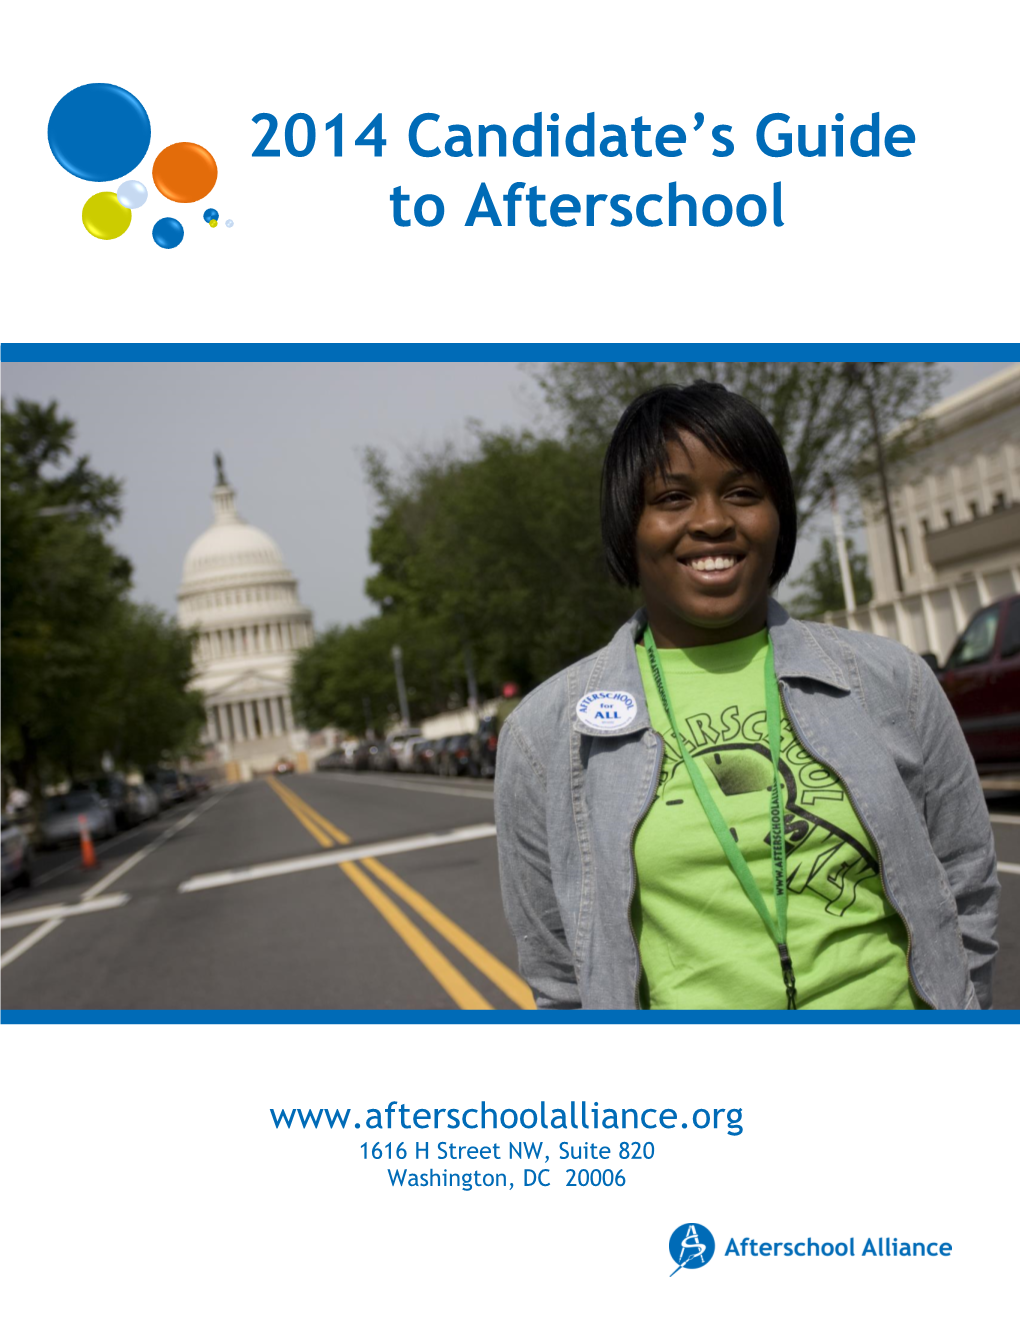 2014 Candidate's Guide to Afterschool